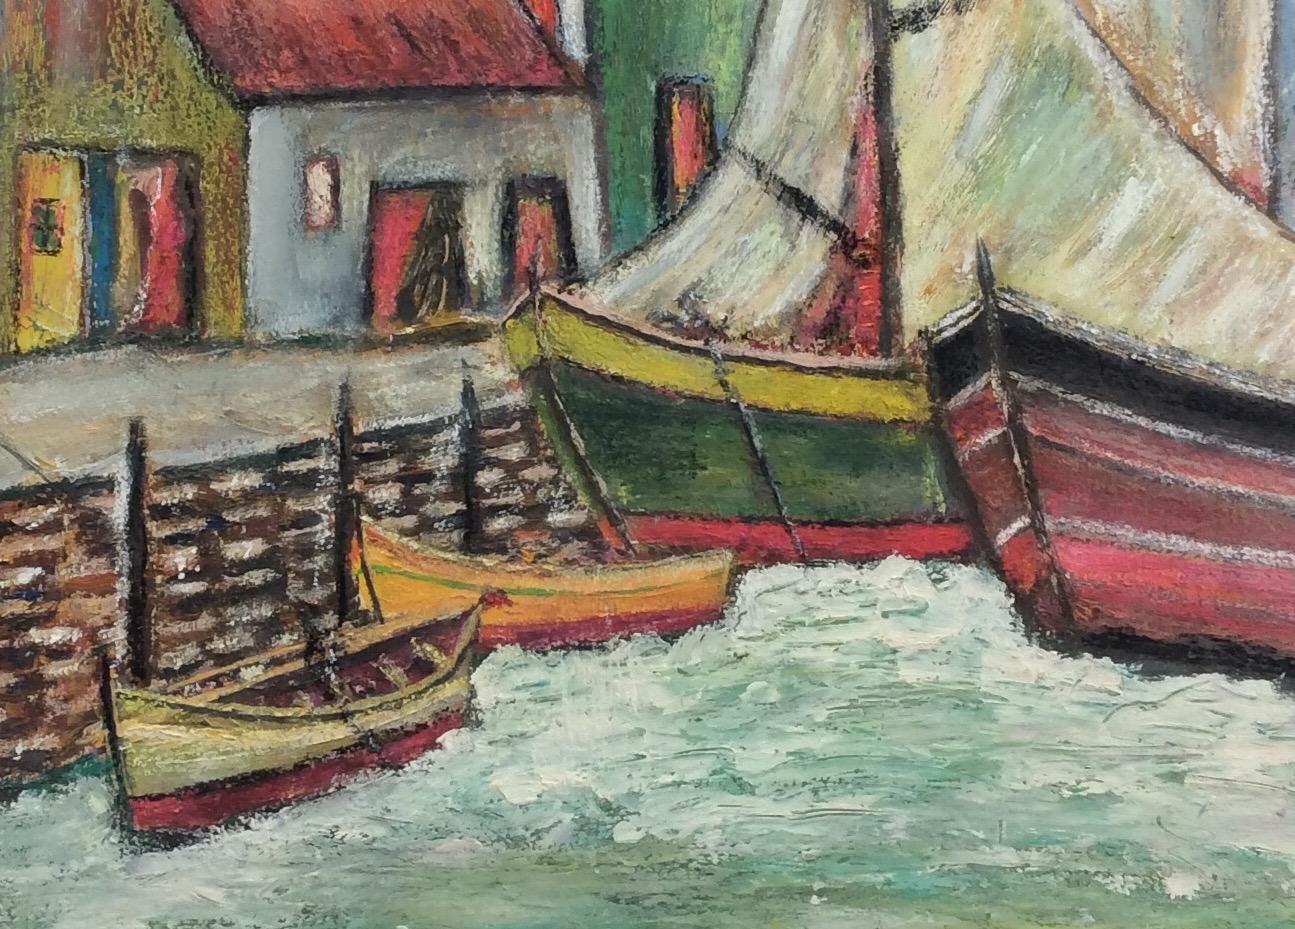 Beautiful original painting by a French artist. The scene of sailboats docked in front of a coastal village is captivating. The very vivid blue, white, aqua, green, yellow and variations of red colors will enhance any wall.
Signed.

A nice,